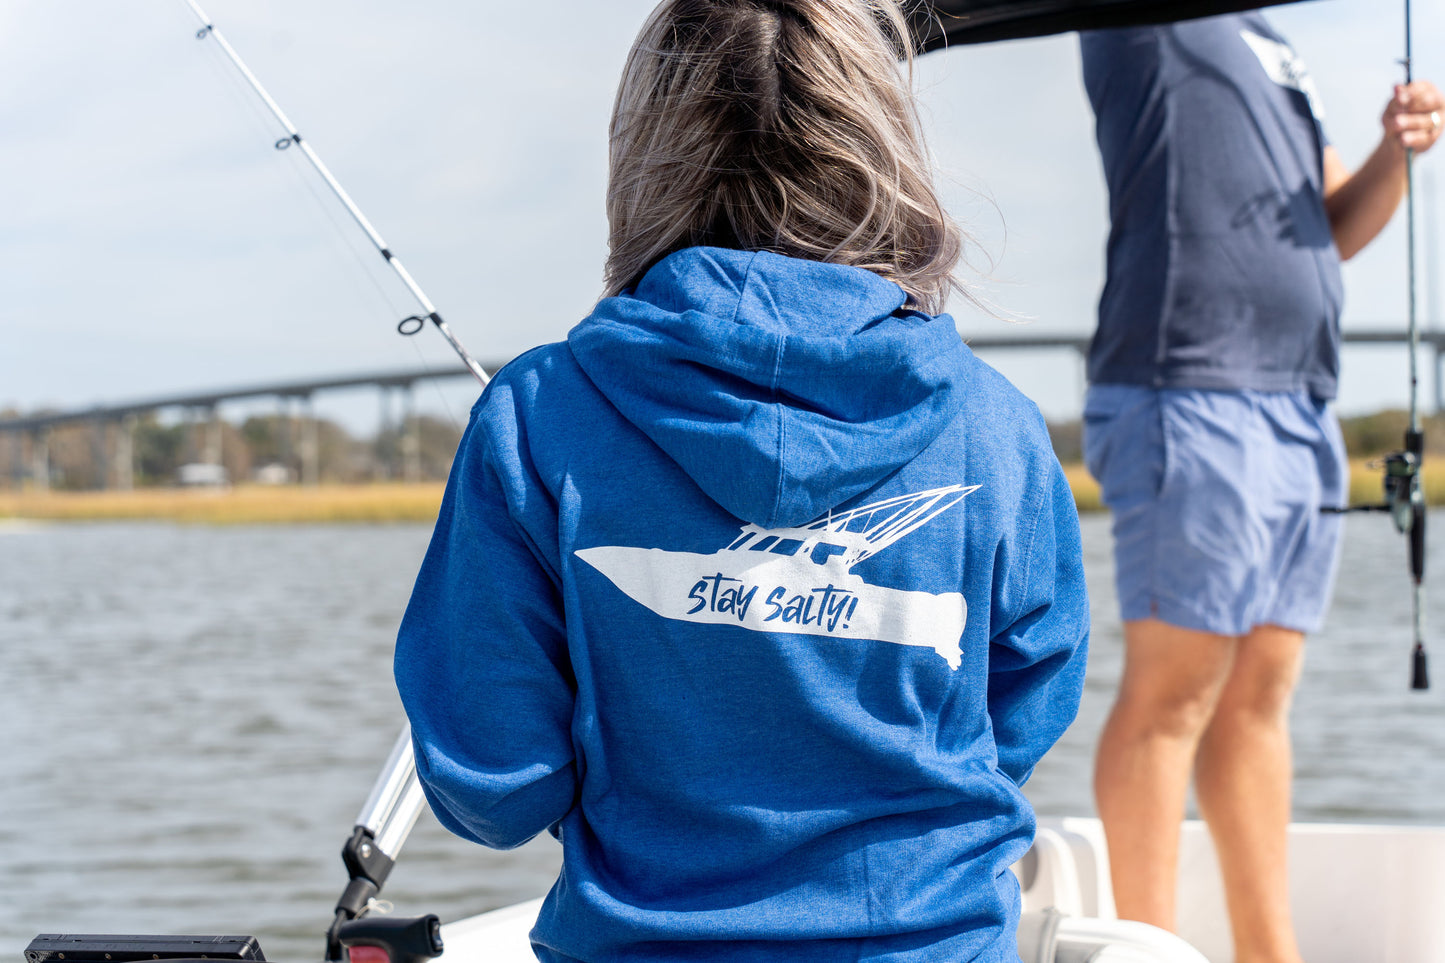 "Stay Salty!" Boat - Mid-weight Beach Hoodie